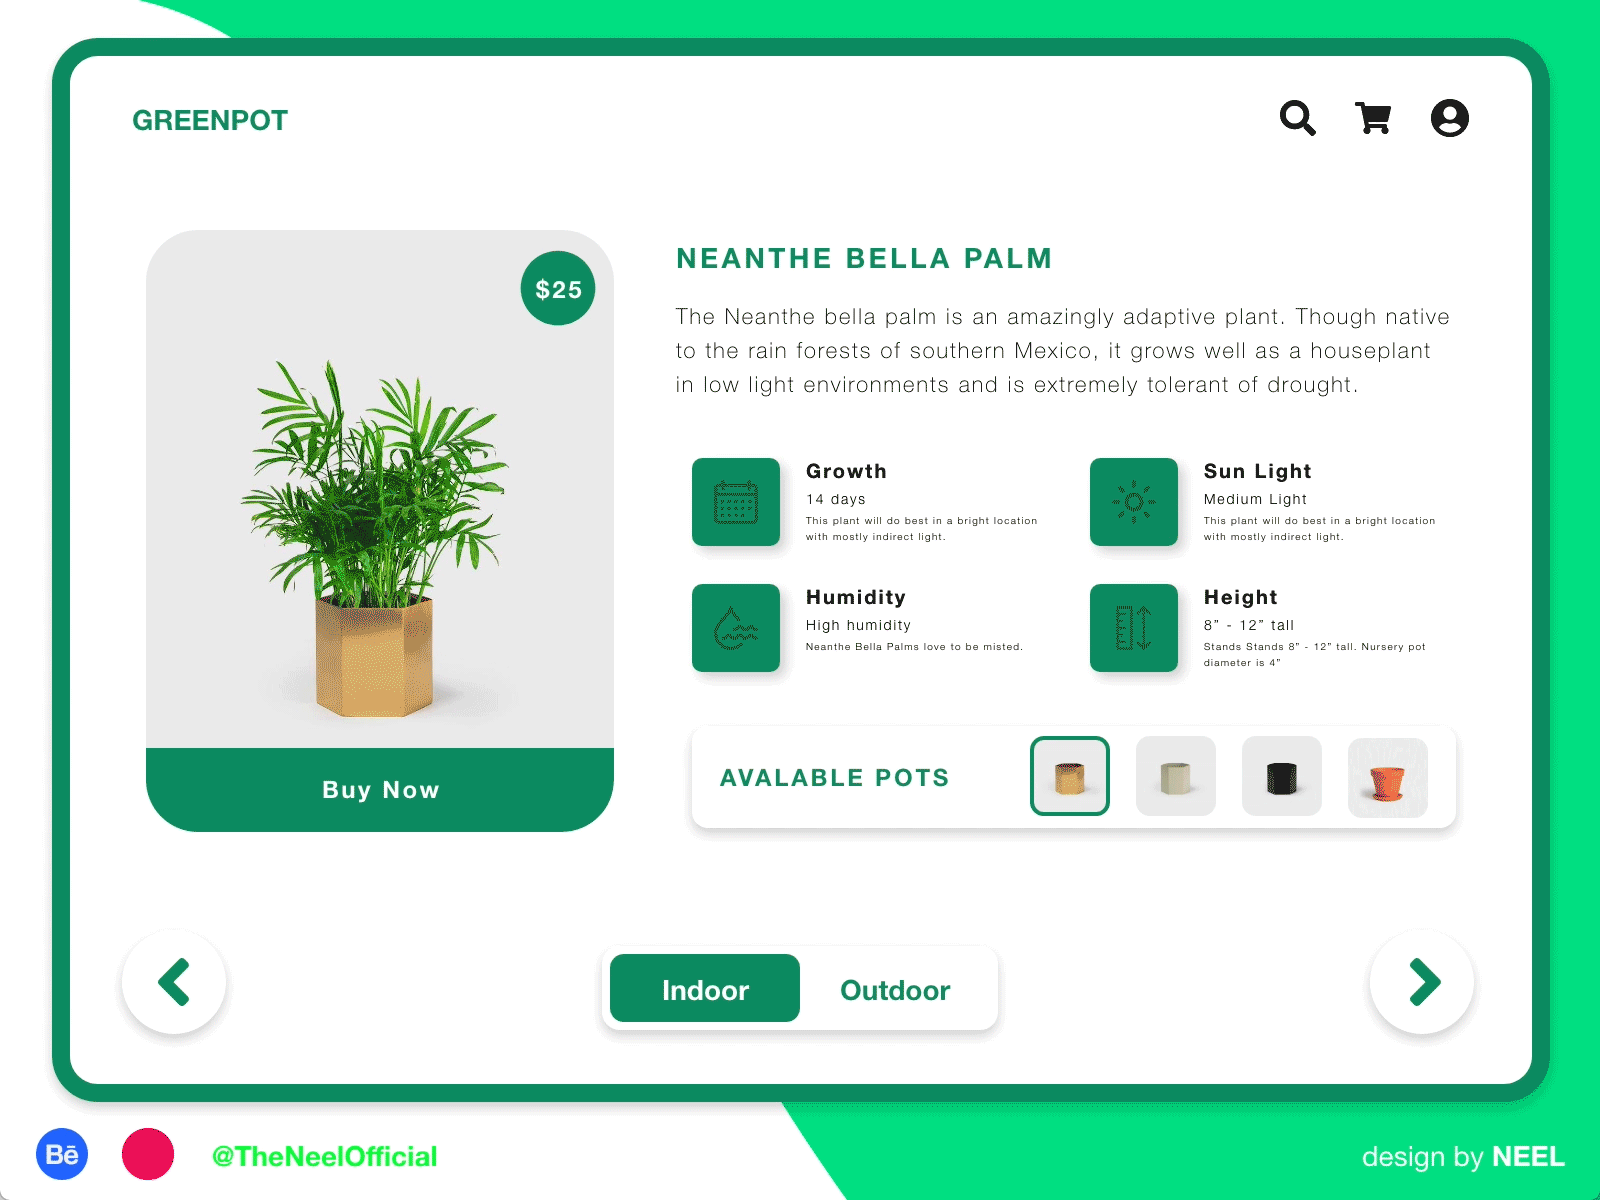 World Environment Day Plant App adobexd ecommerce enviroment garden plants green greenery indoor garden indoor plants plant app planting plants product design save earth save plants ui design user experience ux uxdesign web design